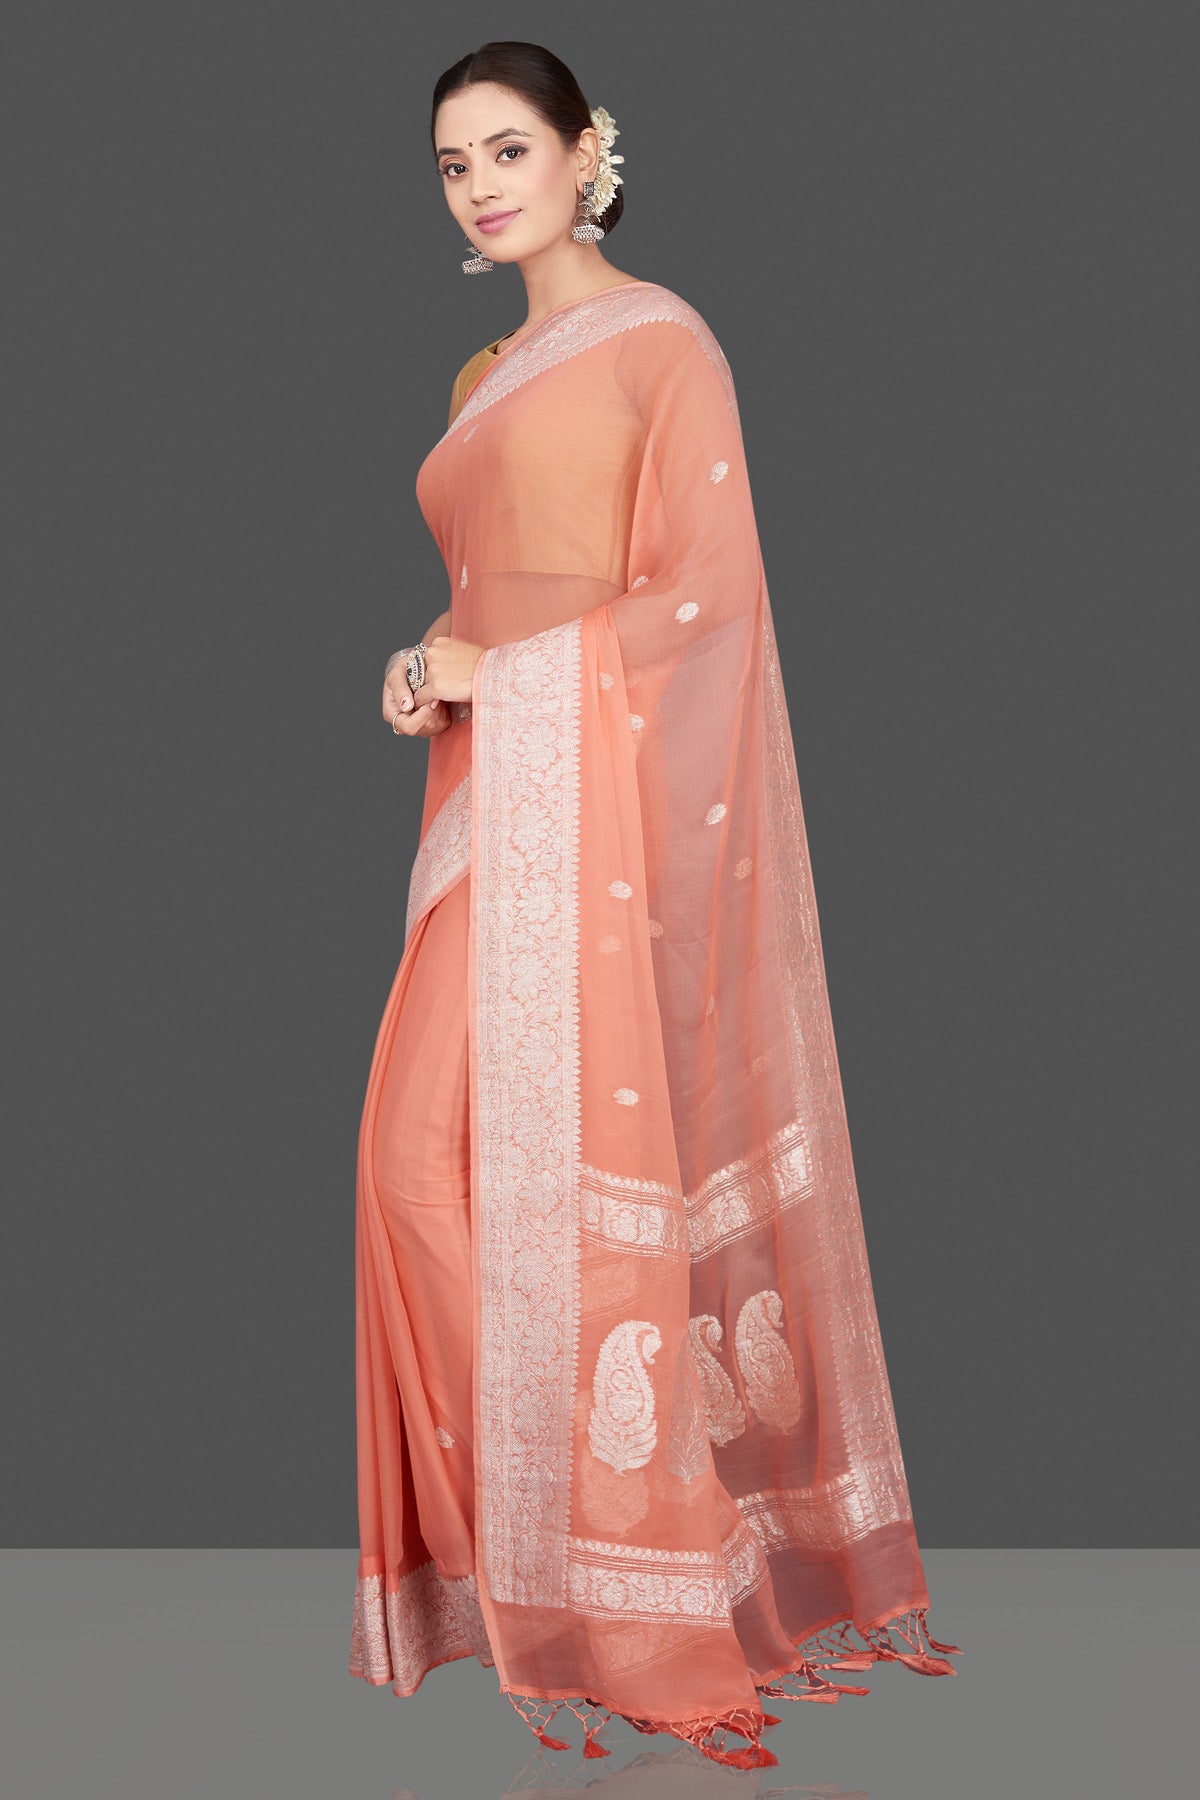 Buy stunning peach color georgette chiffon saree online in USA with silver zari border. Go for stunning Indian designer sarees, georgette sarees, handwoven sarees, embroidered sarees for festive occasions and weddings from Pure Elegance Indian clothing store in USA.-pallu